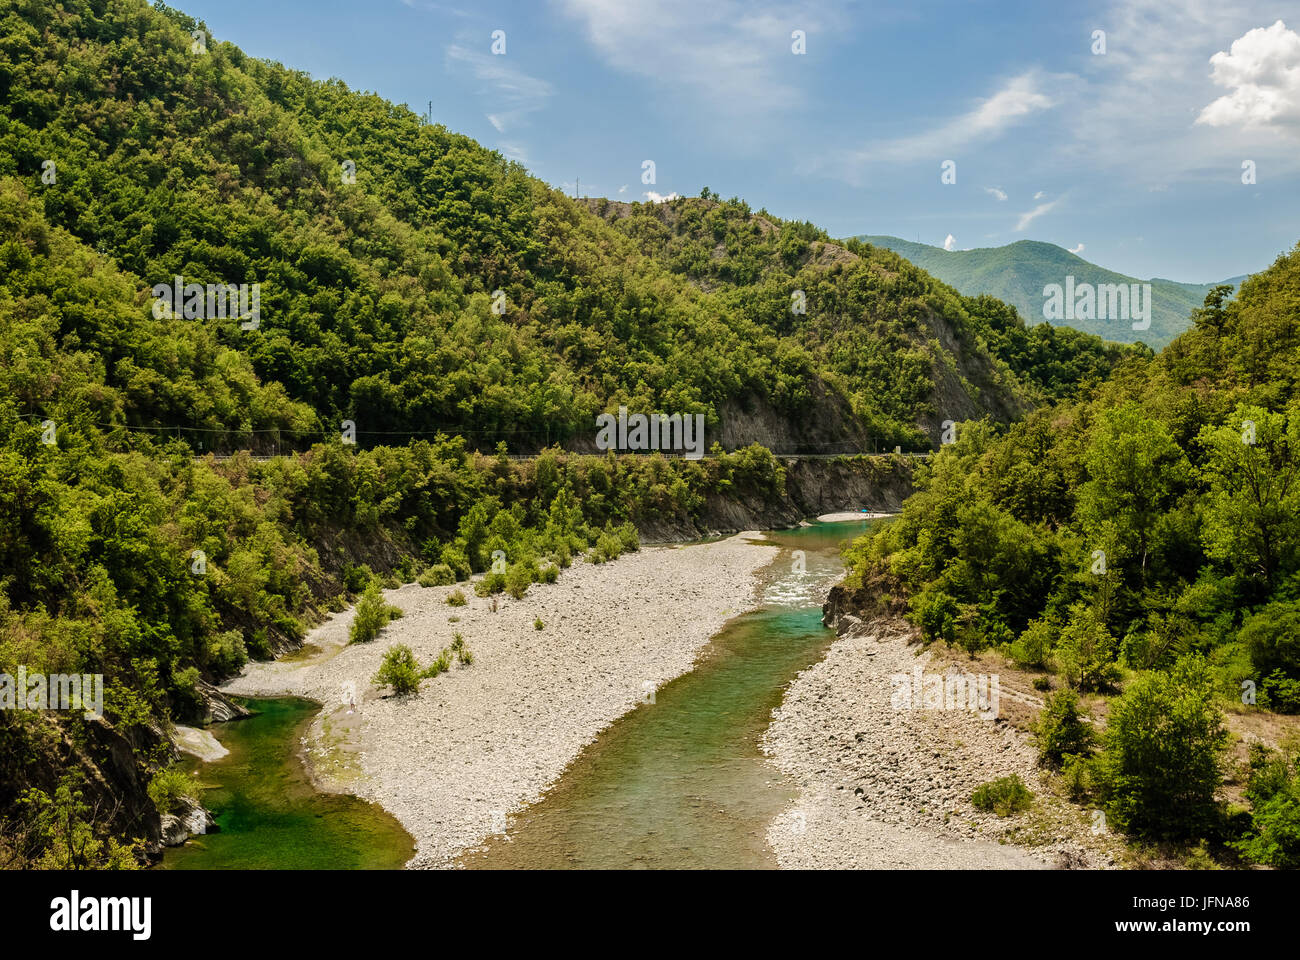 The river Trebbia and surrounding hills during the summer Stock Photo